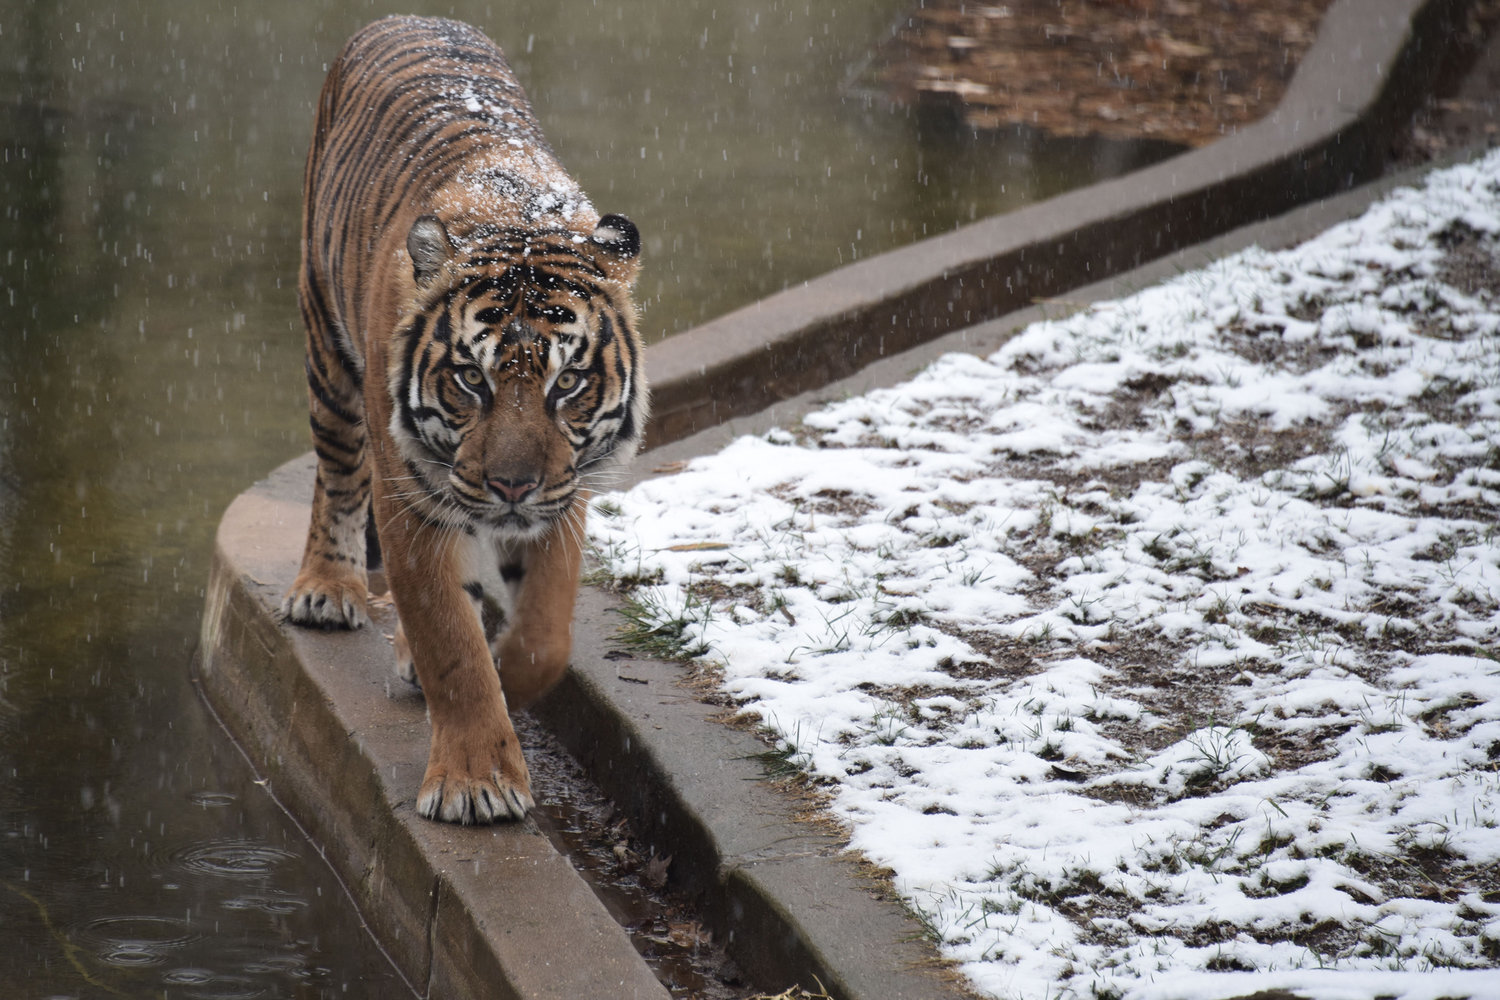 A tiger walks under falling snow at the Smithsonian's National Zoo in Washington D.C. on Dec. 9, 2017. (Eric Baradat/AFP/Getty Images/TNS)